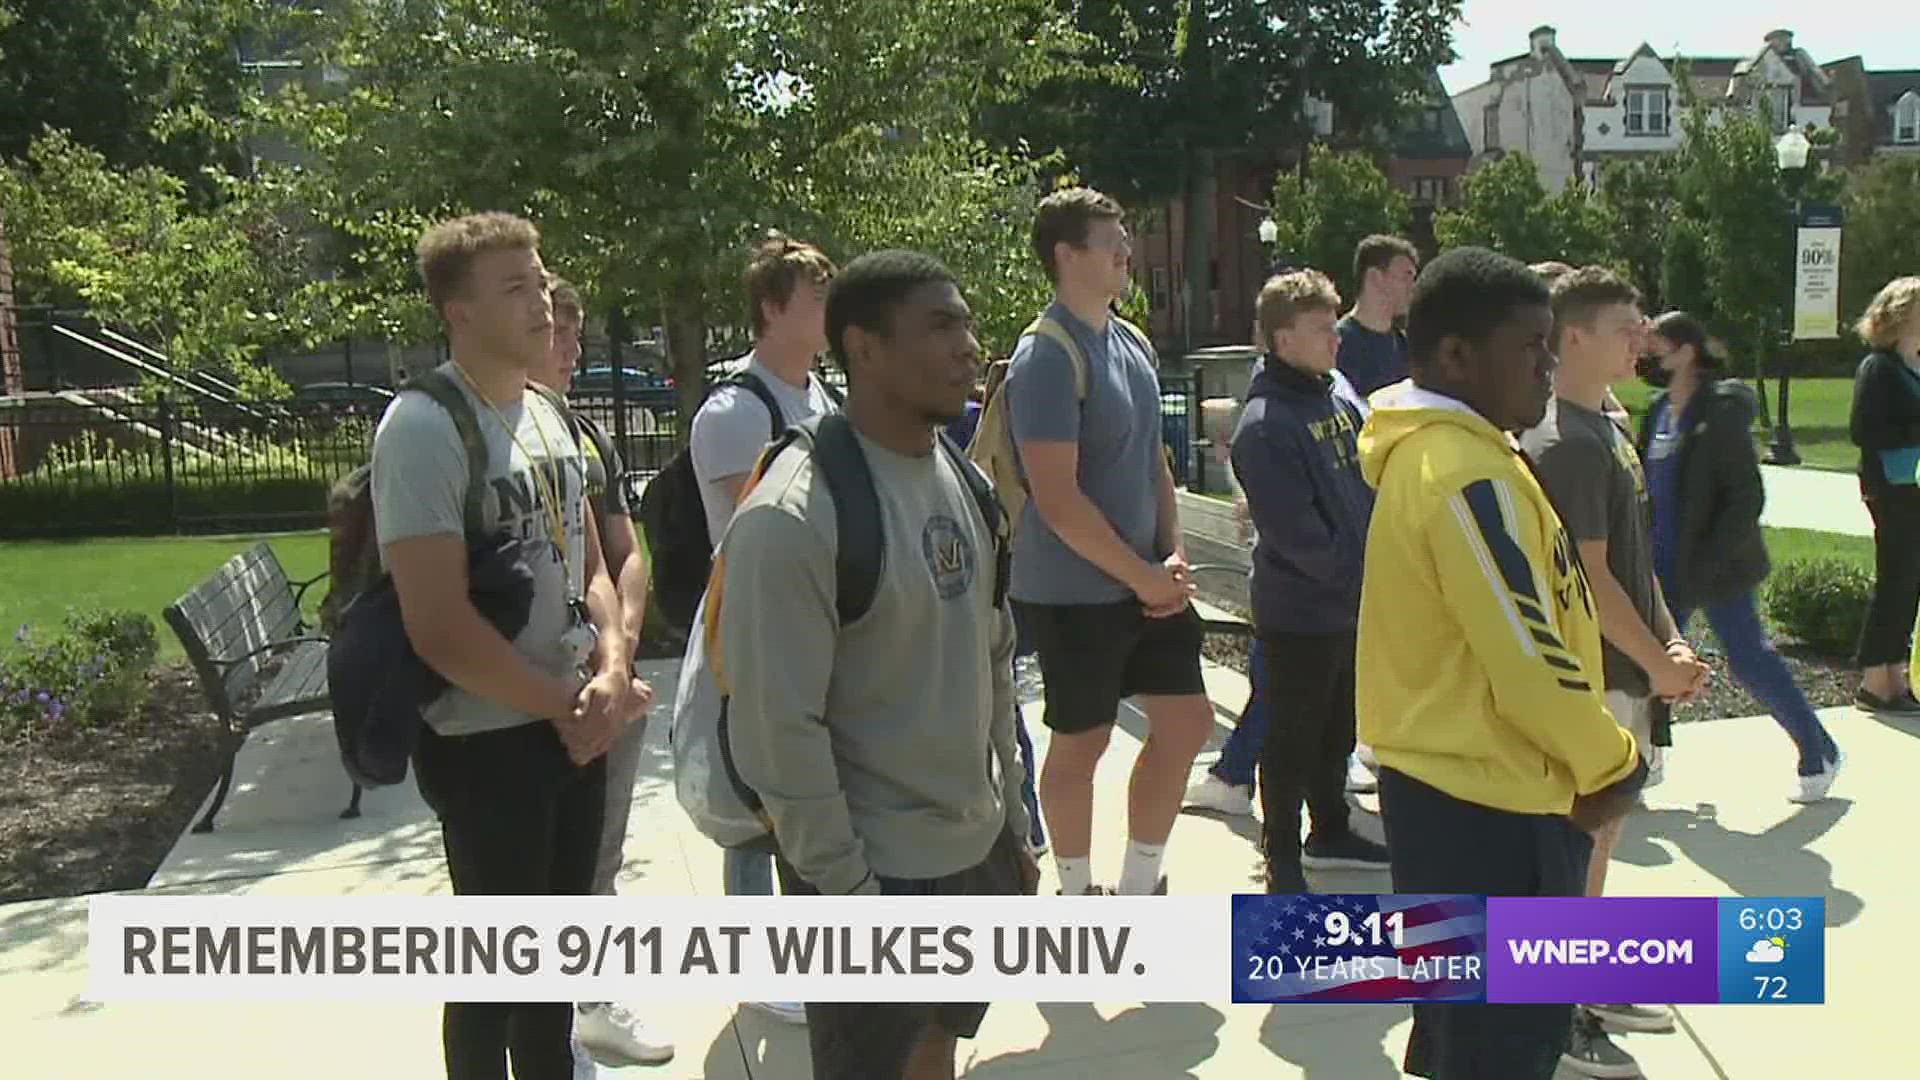 A ceremony to observe the 20th anniversary of 9/11 was held on campus Friday.